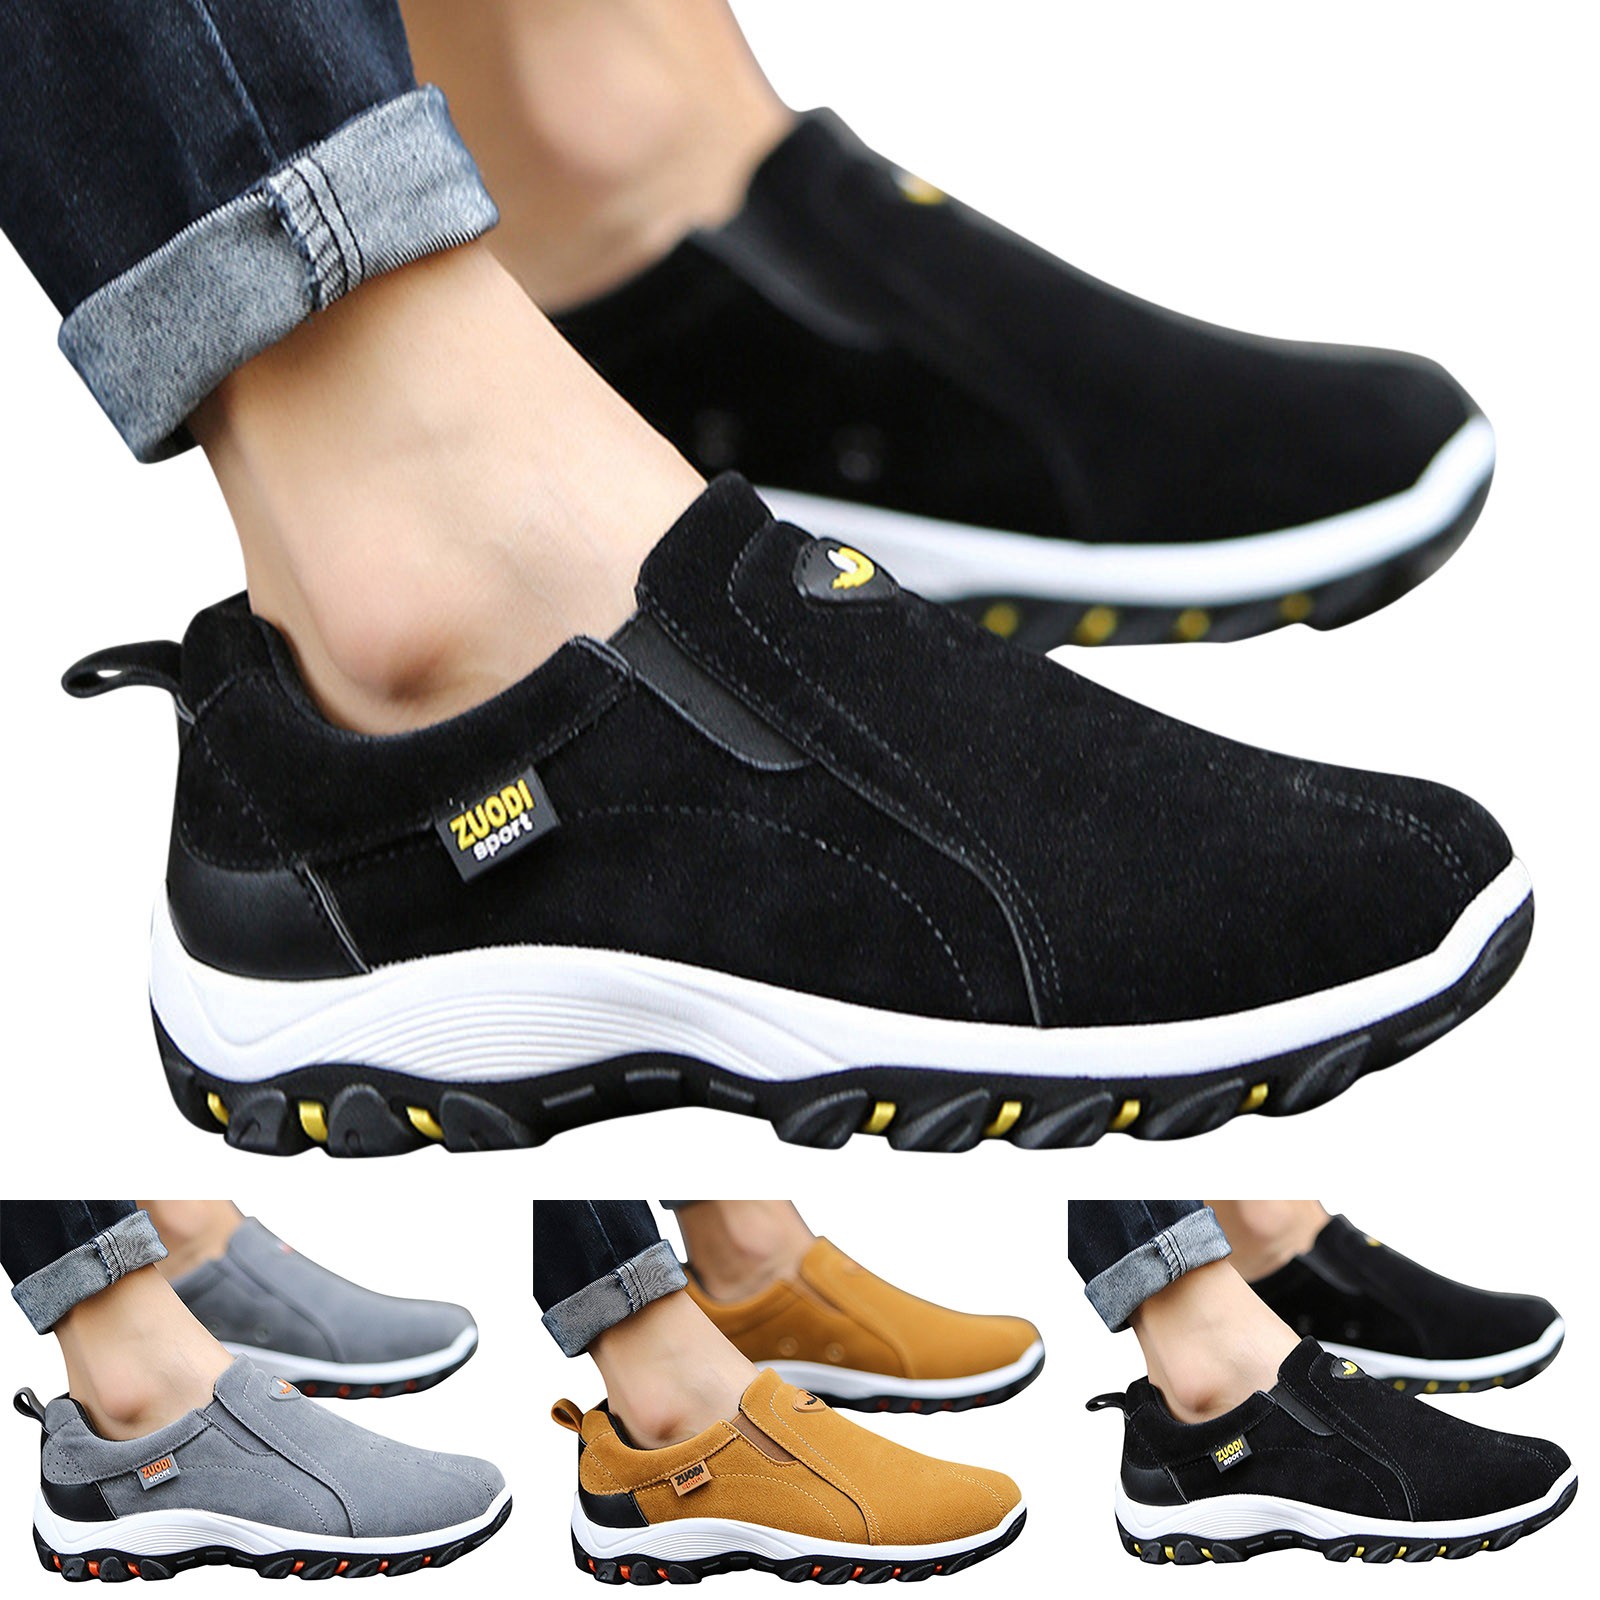 Gubotare Mens Shoes Casual Running Shoes Casual Tennis Walking Gym Fashion Lightweight Slip On Sneakers,Black 11 - image 4 of 5